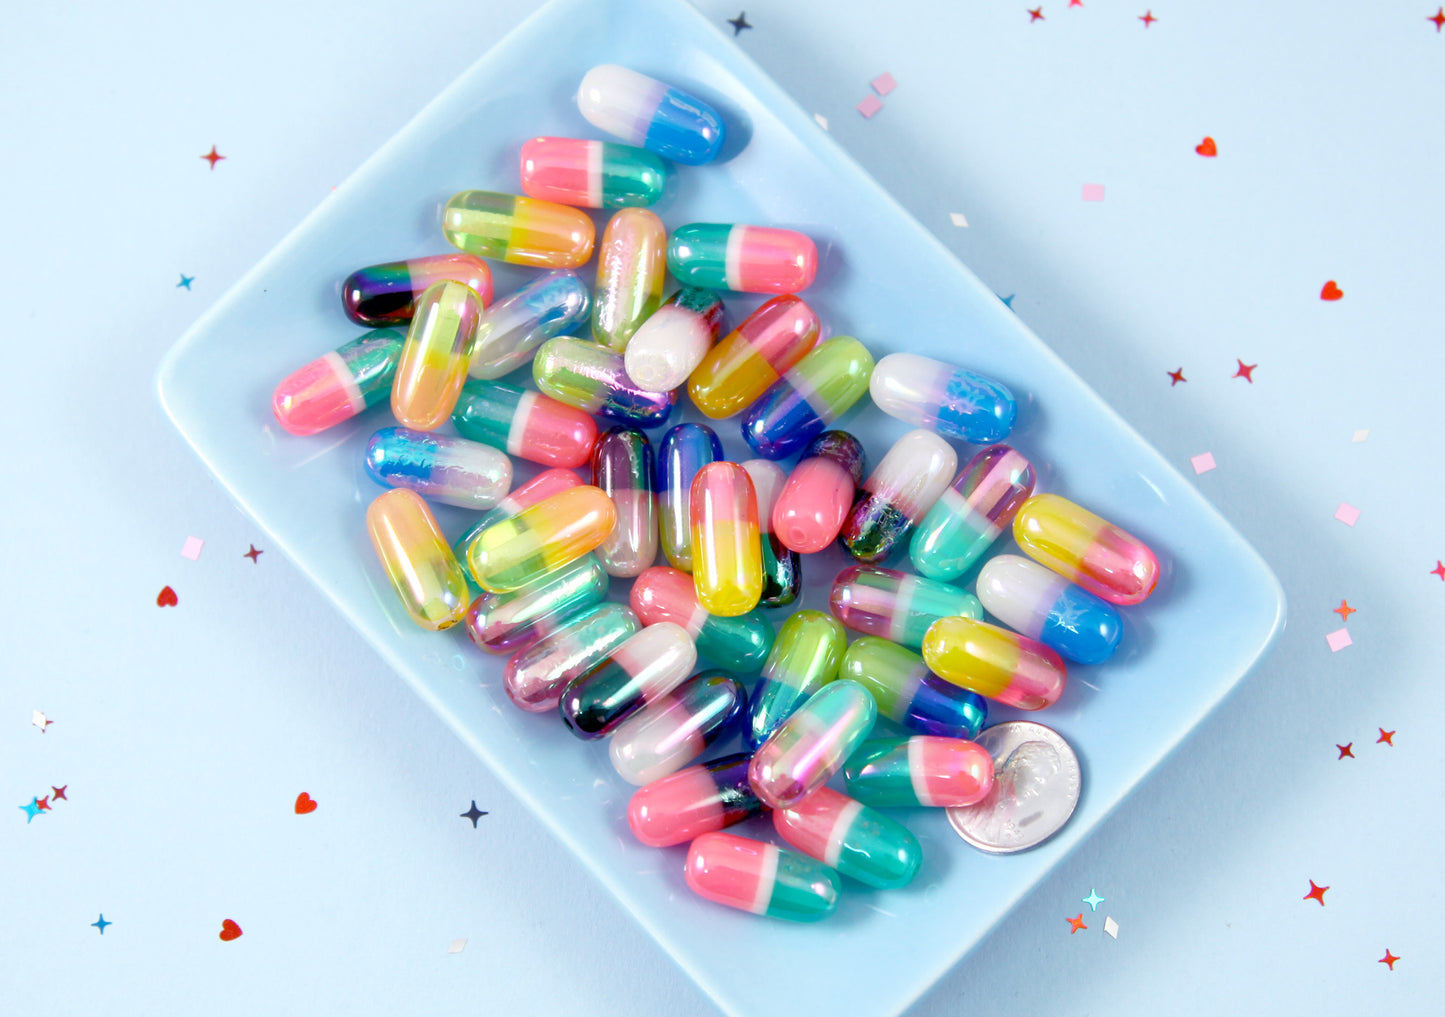 Pill Beads - 21mm Colorful Capsules Fake Pills Plastic or Resin Beads - 10 pc set